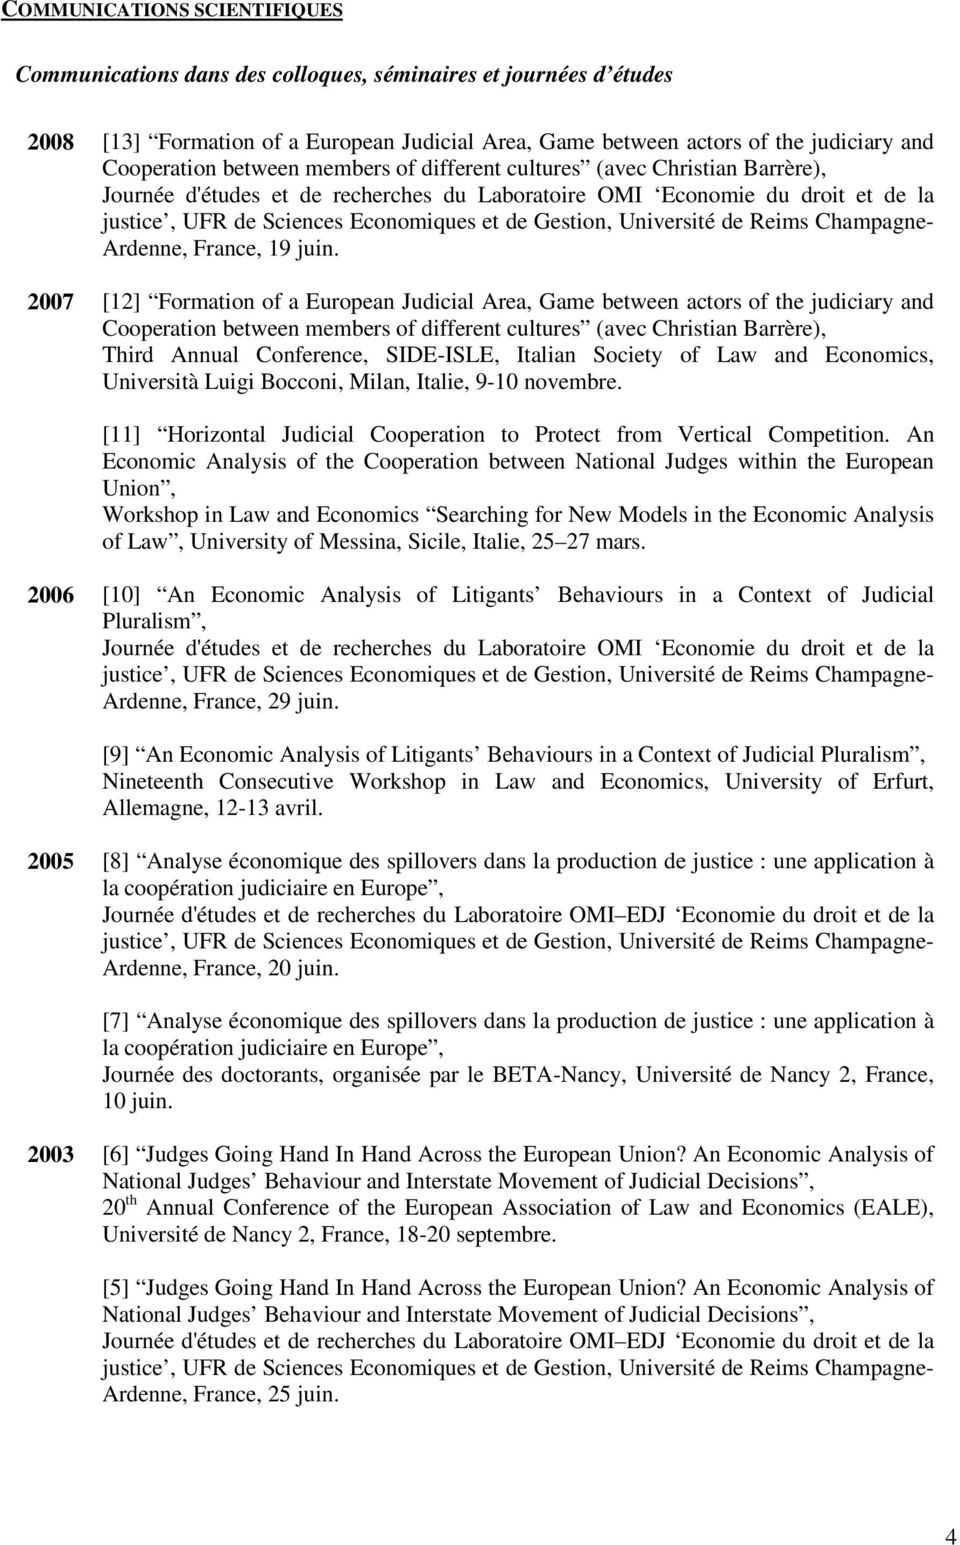 2007 [12] Formation of a European Judicial Area, Game between actors of the judiciary and Cooperation between members of different cultures (avec Christian Barrère), Third Annual Conference,